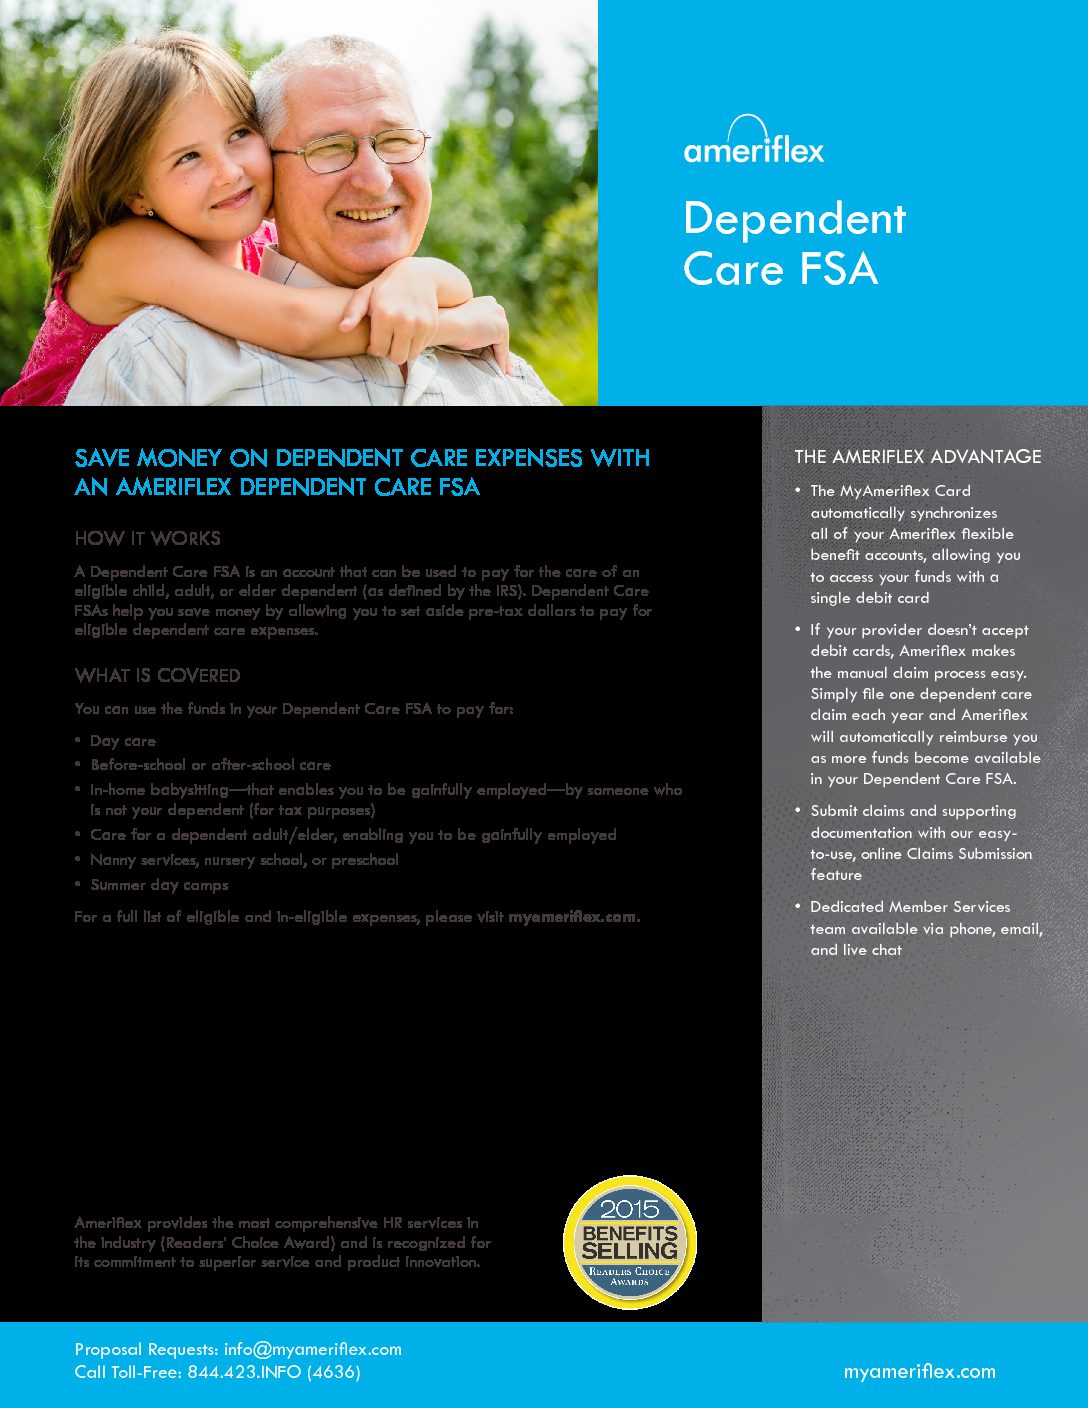 Eligible Expenses - American Benefits Group